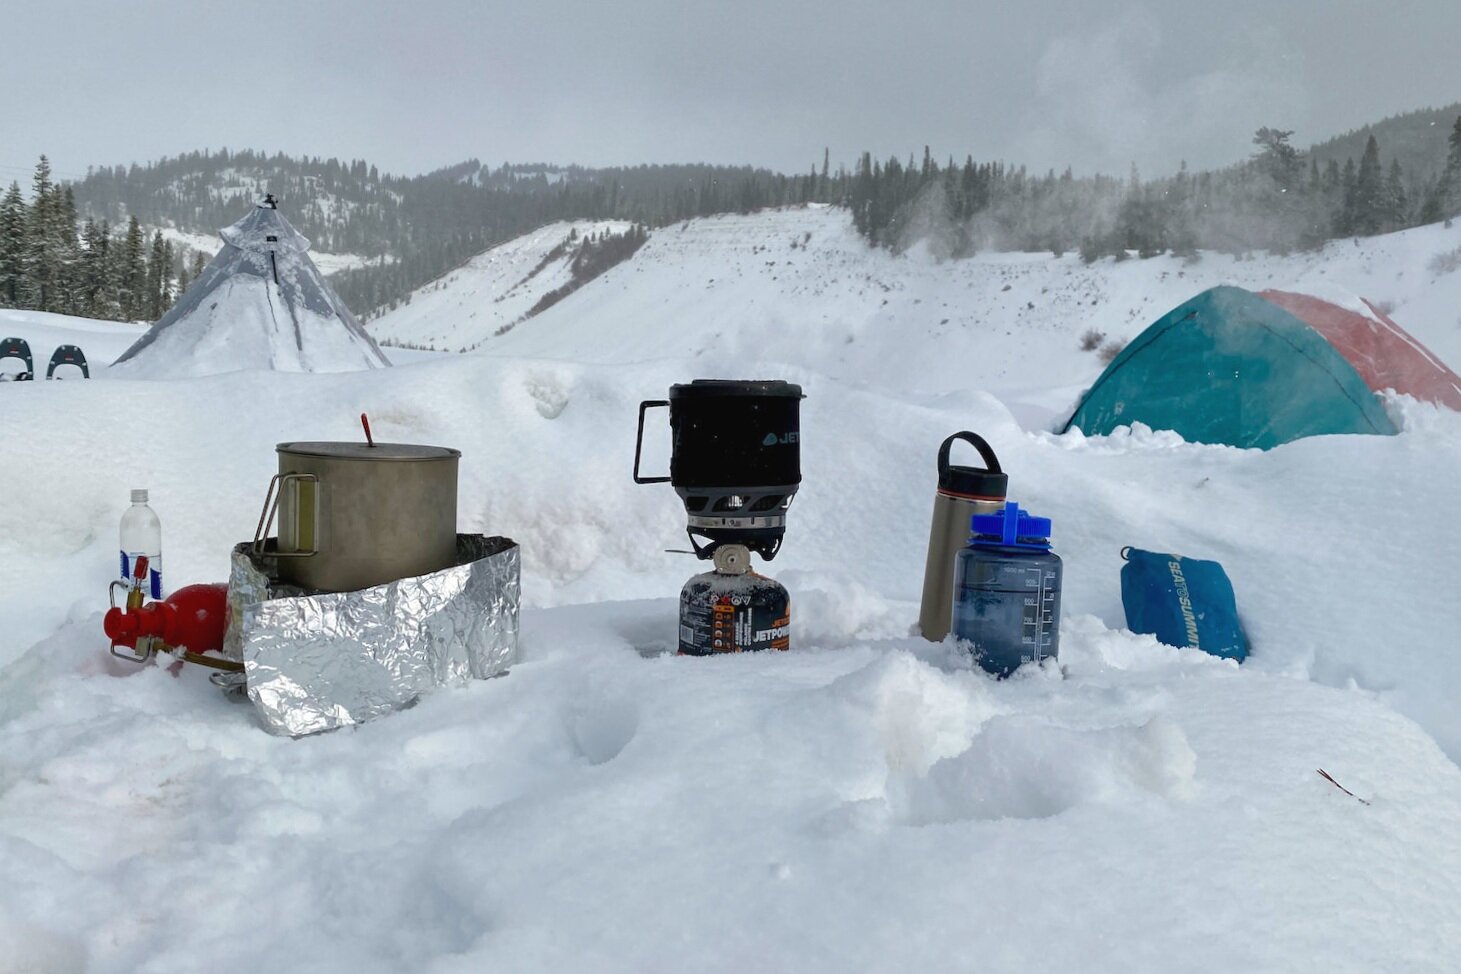 Check out our Winter Camping Checklist for more details on gear that performs well in the cold